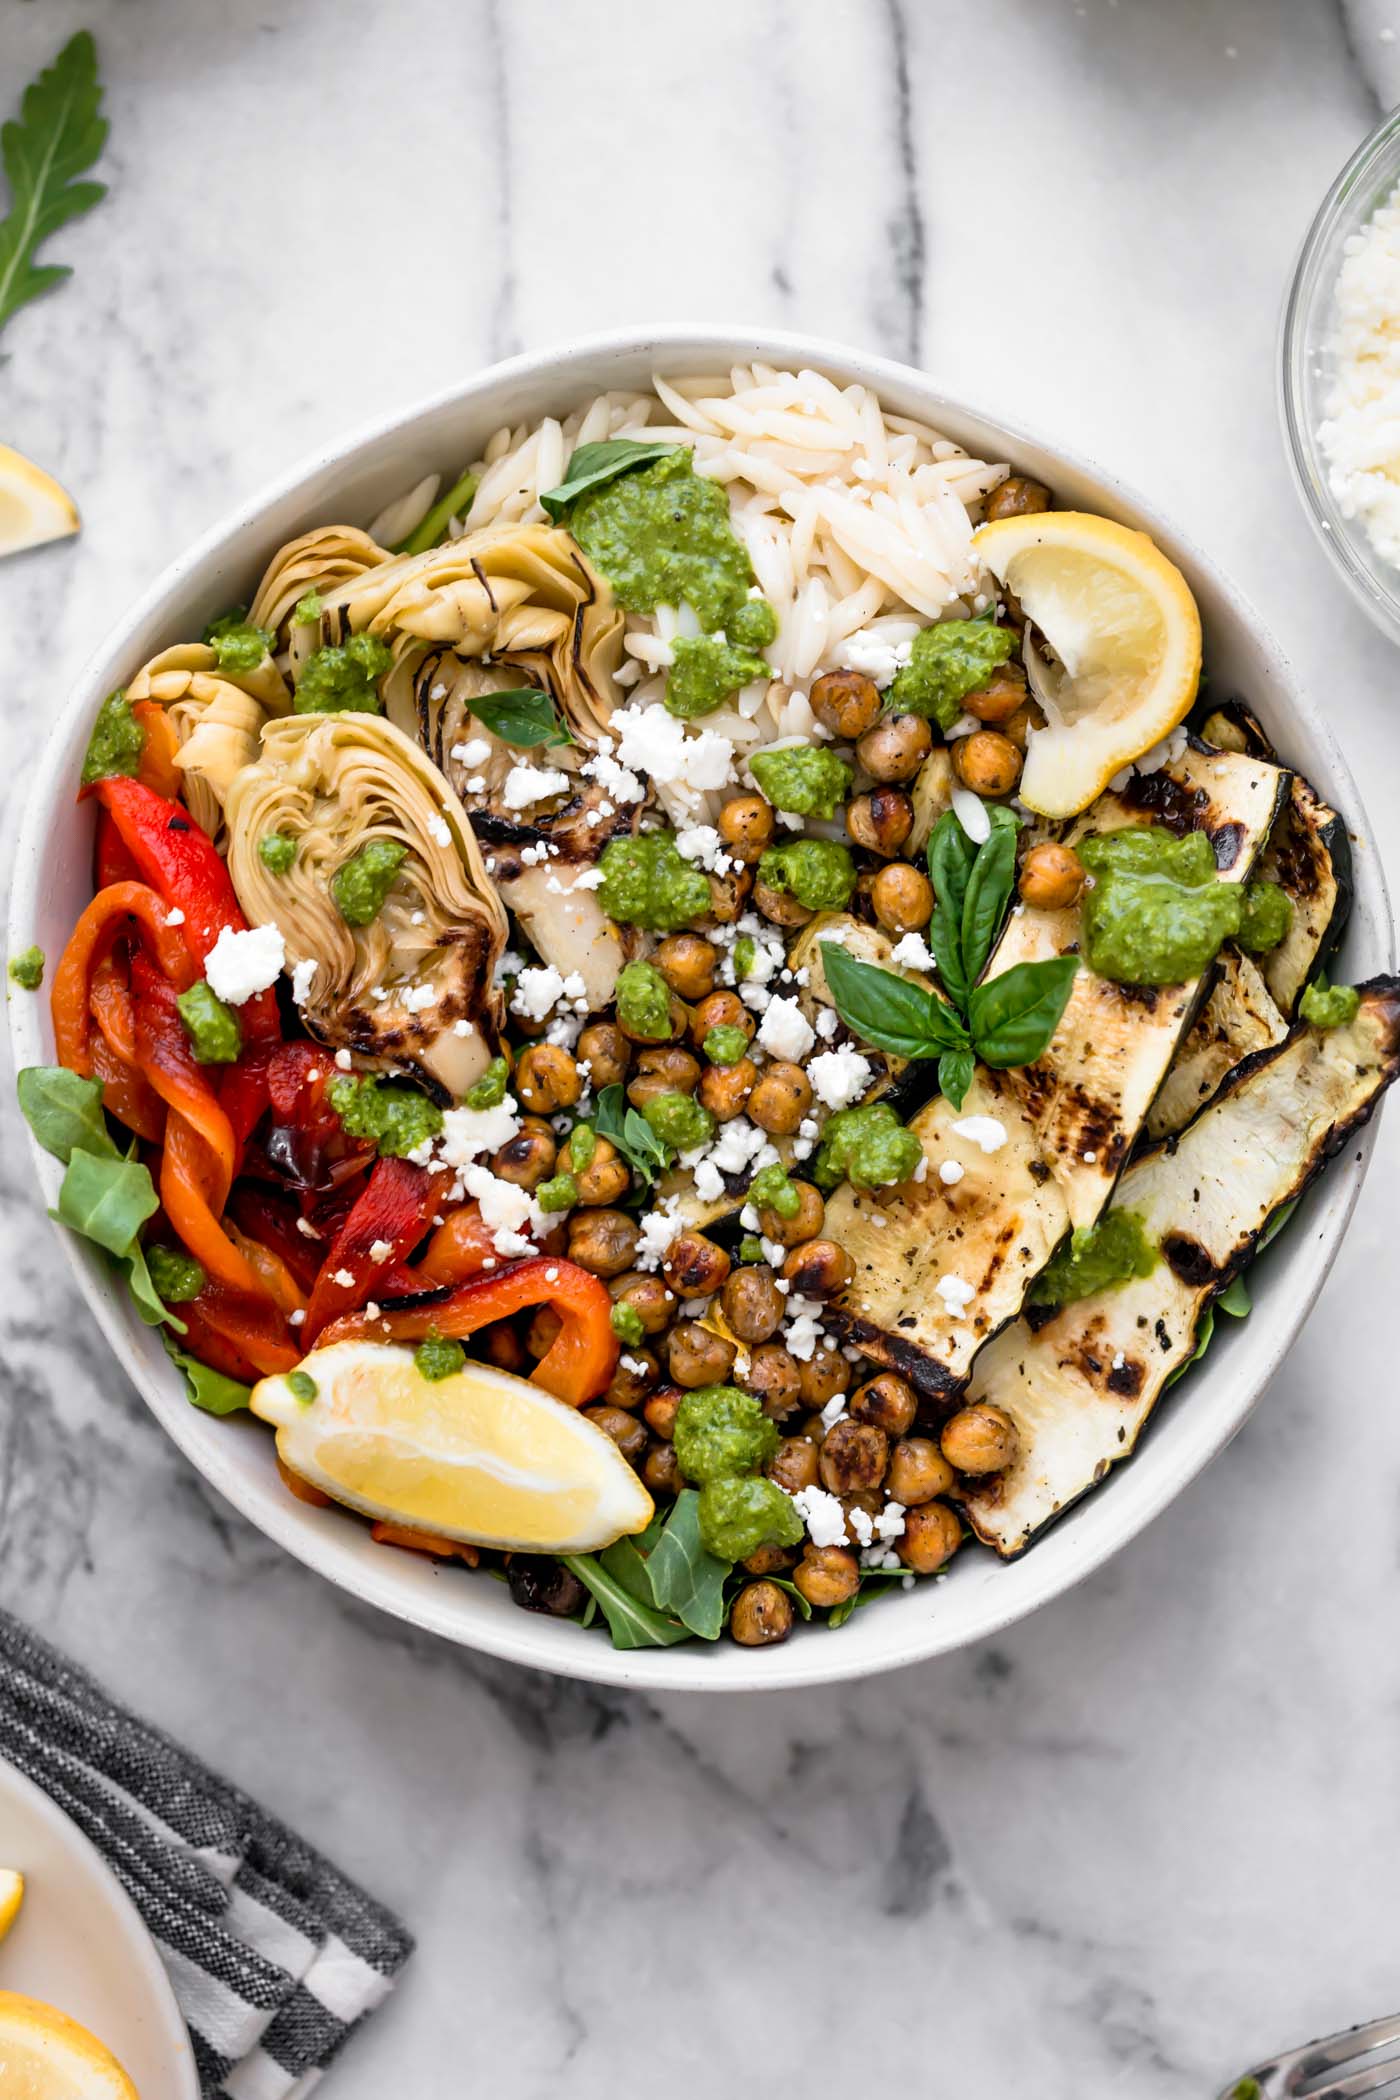   Pictured: Grilled Vegetable Primavera Bowls by Plays Well with Butter (48 Quick and Easy Meatless Meals for Busy People)  